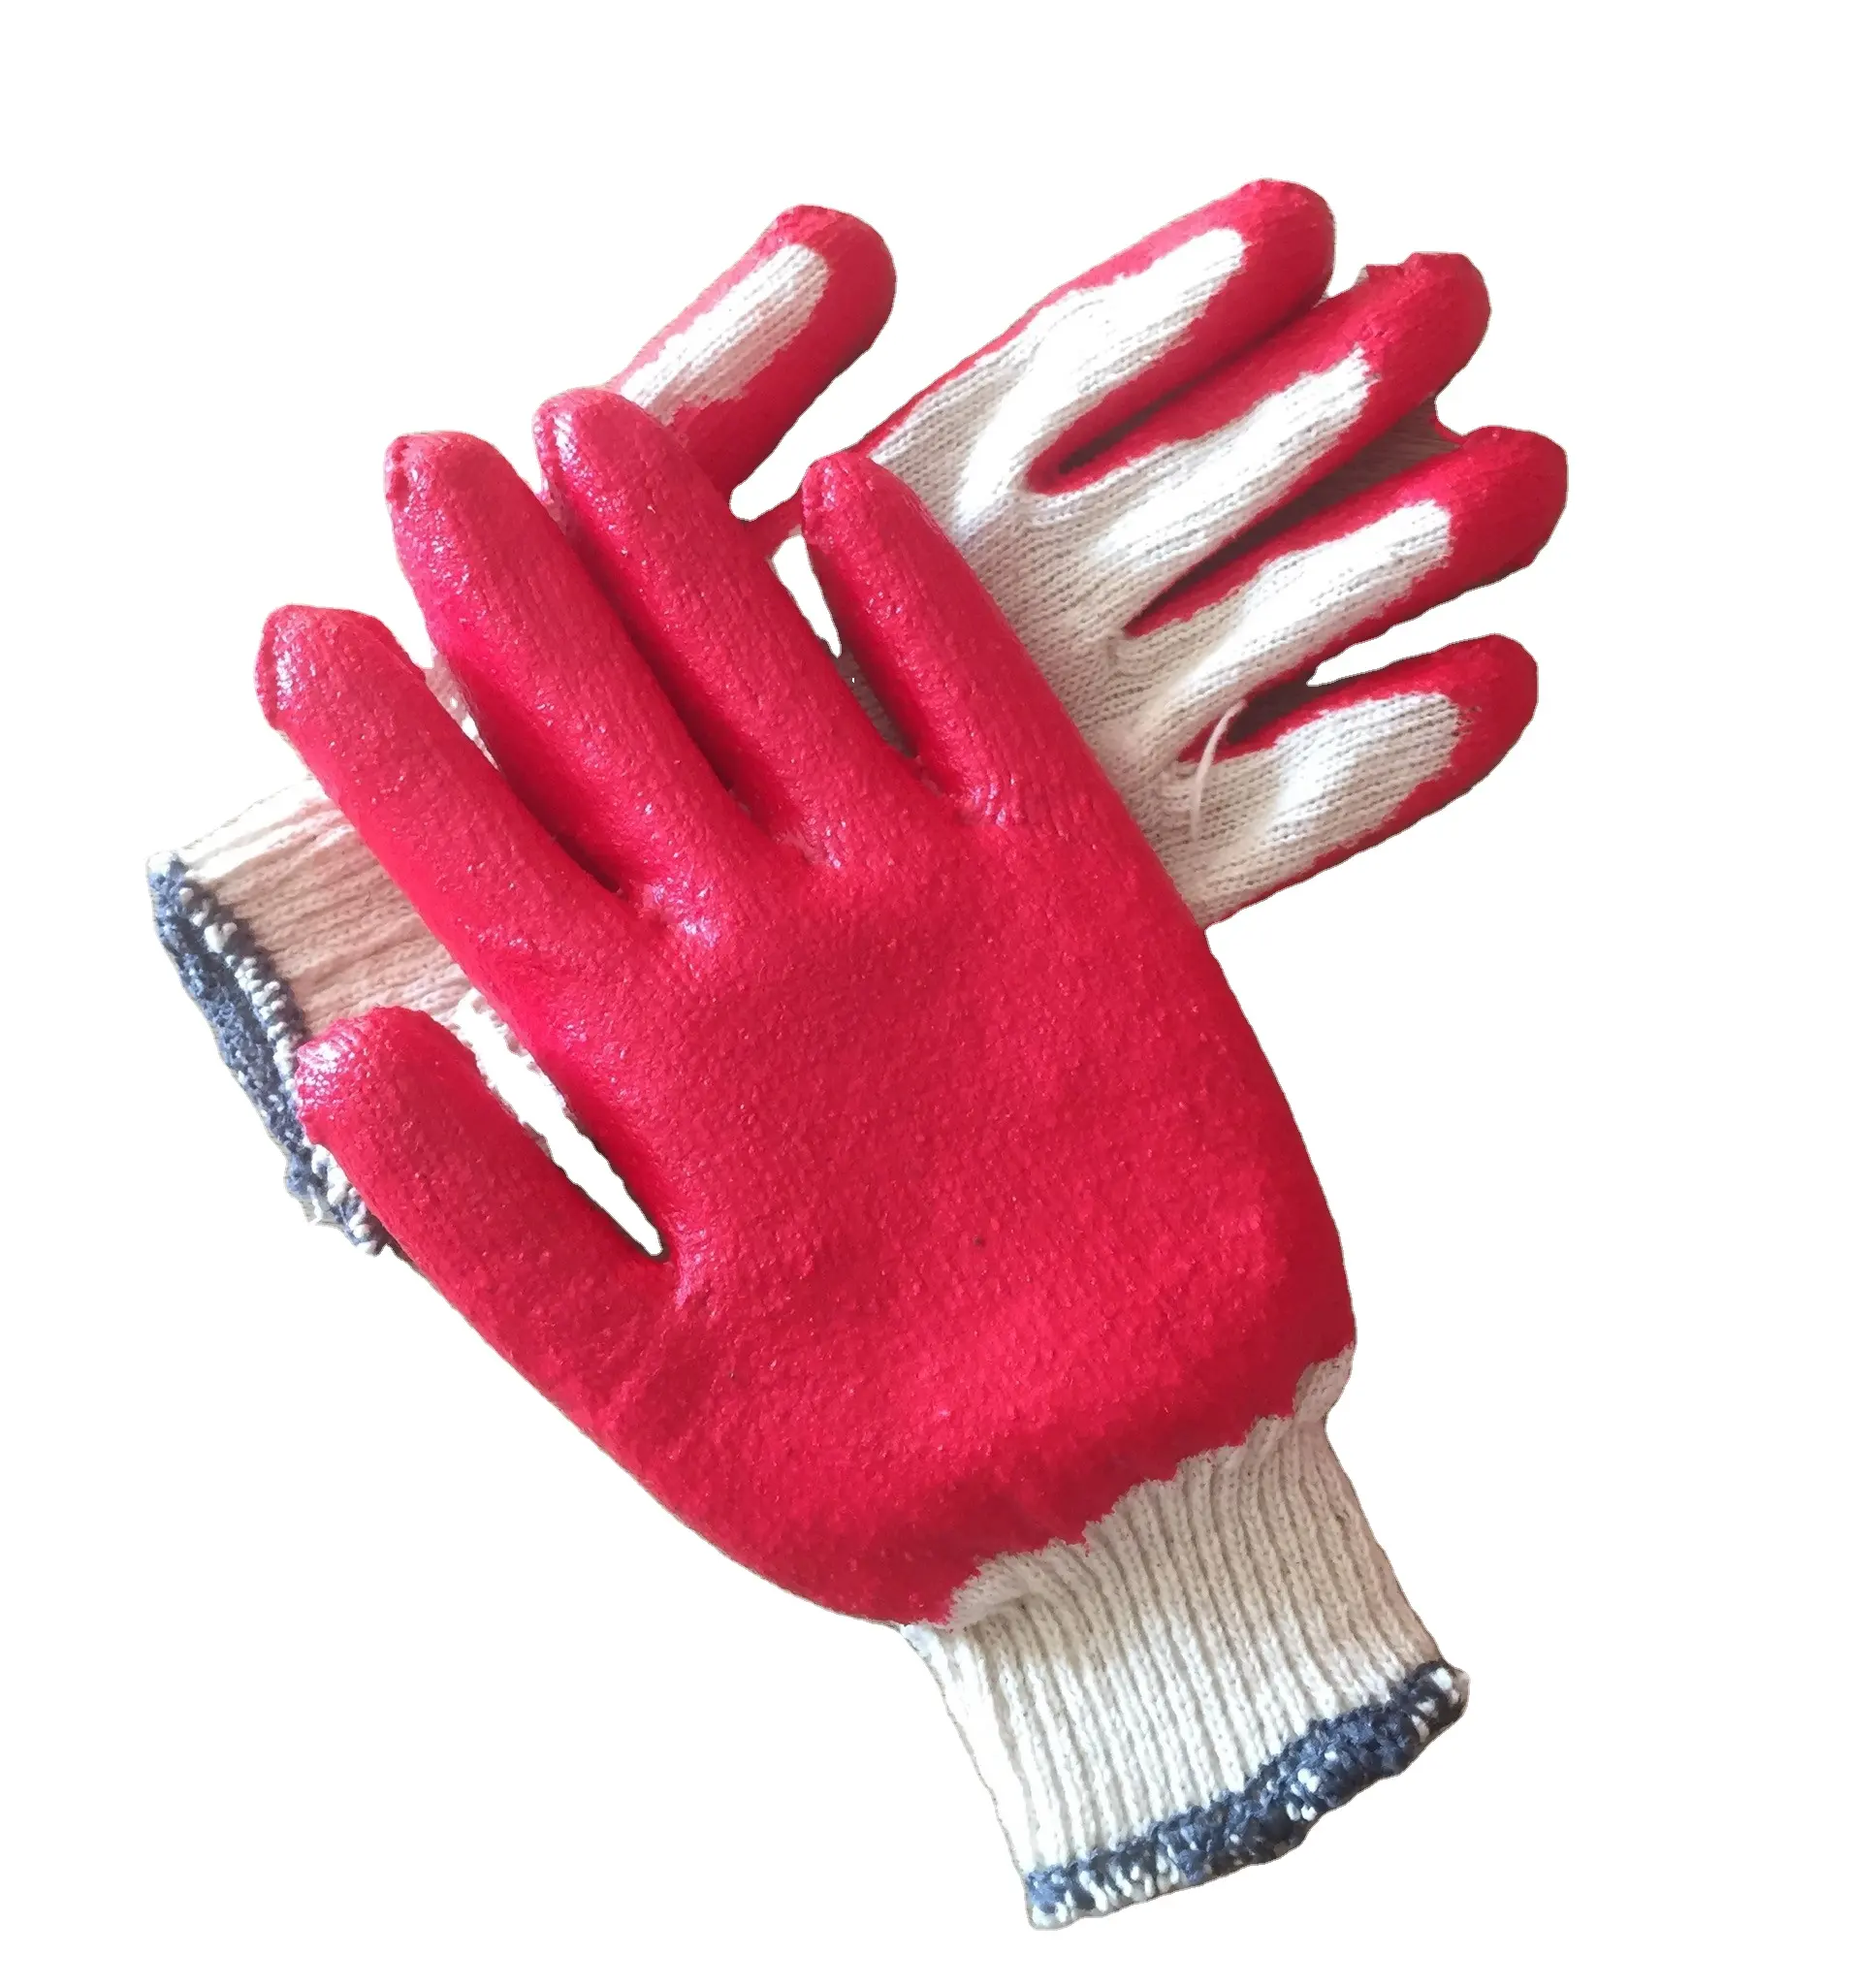 Vietnamese Hot Selling Half Latex Coated Gloves - Natural Latex Palm Dipping Cotton Shell - Premium Safety Knitted Gloves